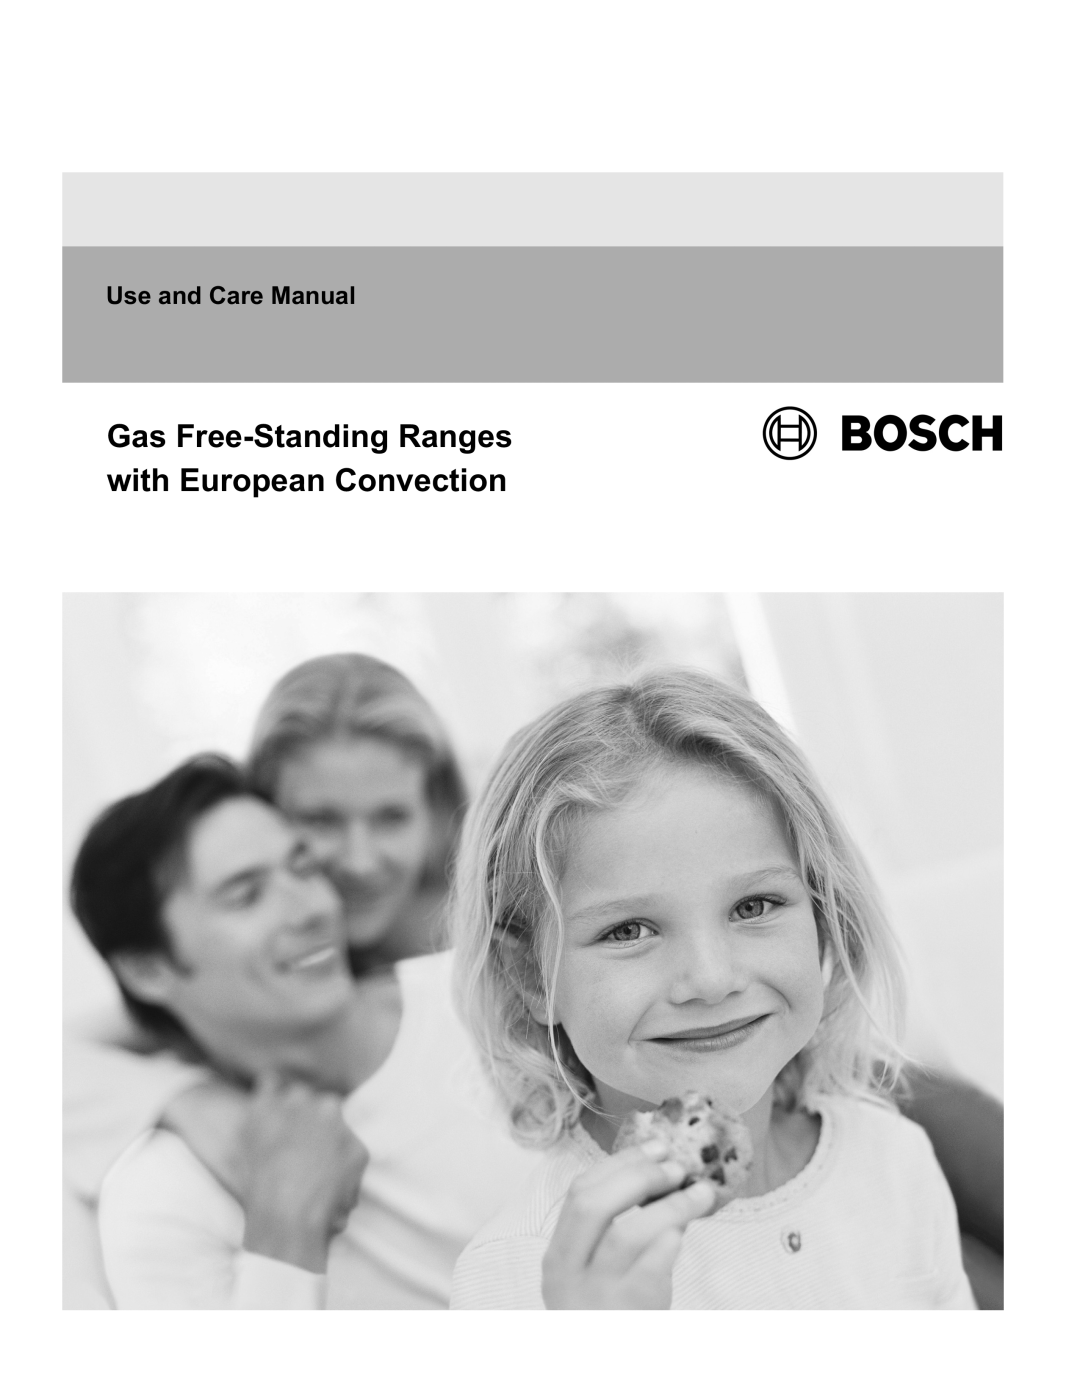 Bosch Appliances HGS7282UC manual Gas Free-StandingRanges with European Convection, Use and Care Manual 